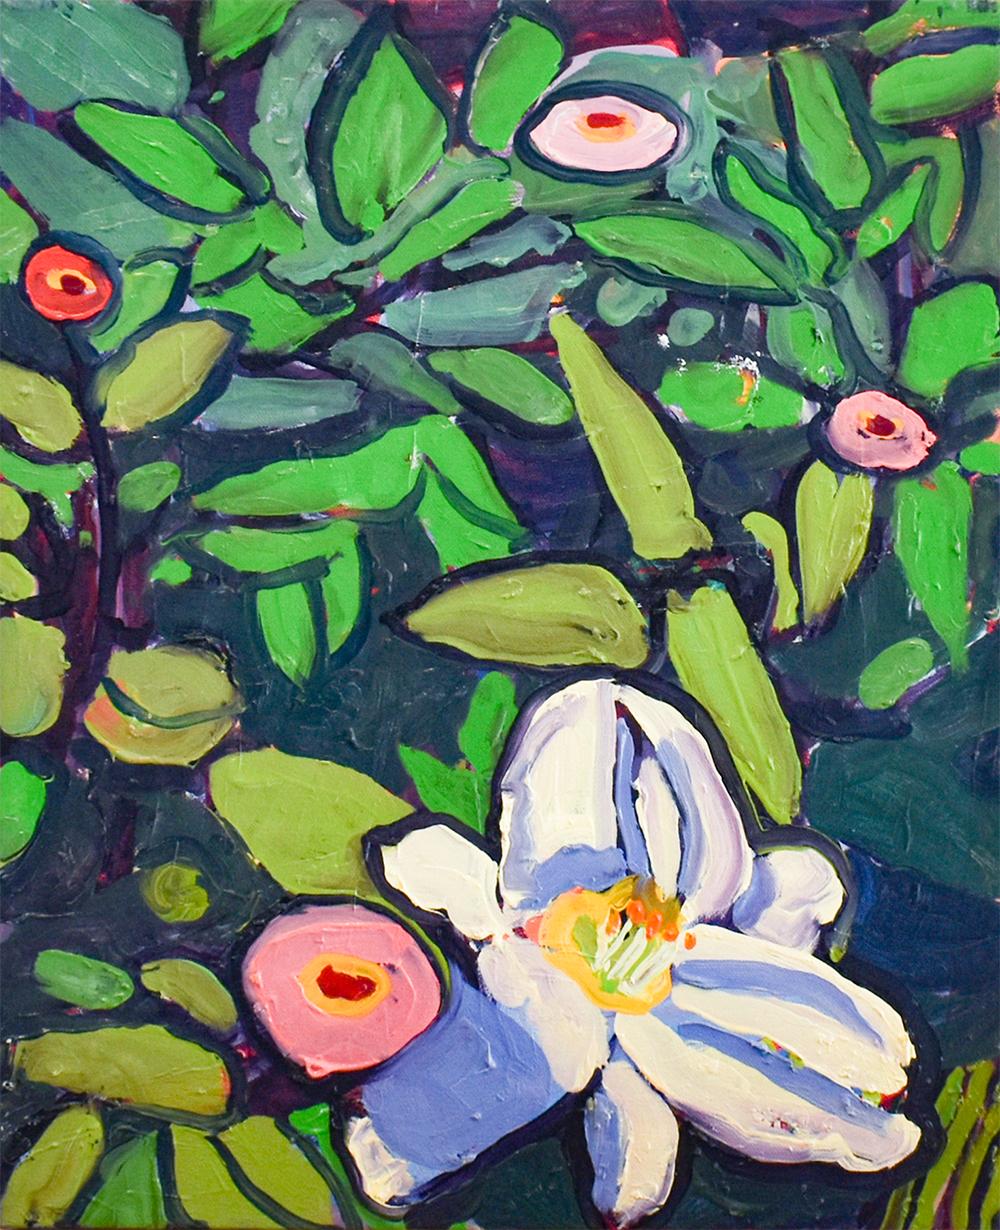 This listing contains two paintings by the artist Dan Rupe:

1) "White Day Lillies & Zinnias I", 2016, 19 x 16 inches, oil on canvas unframed, $1000
Modern, Fauvist style floral still life painting of white day lilies, zinnias, and green grass with